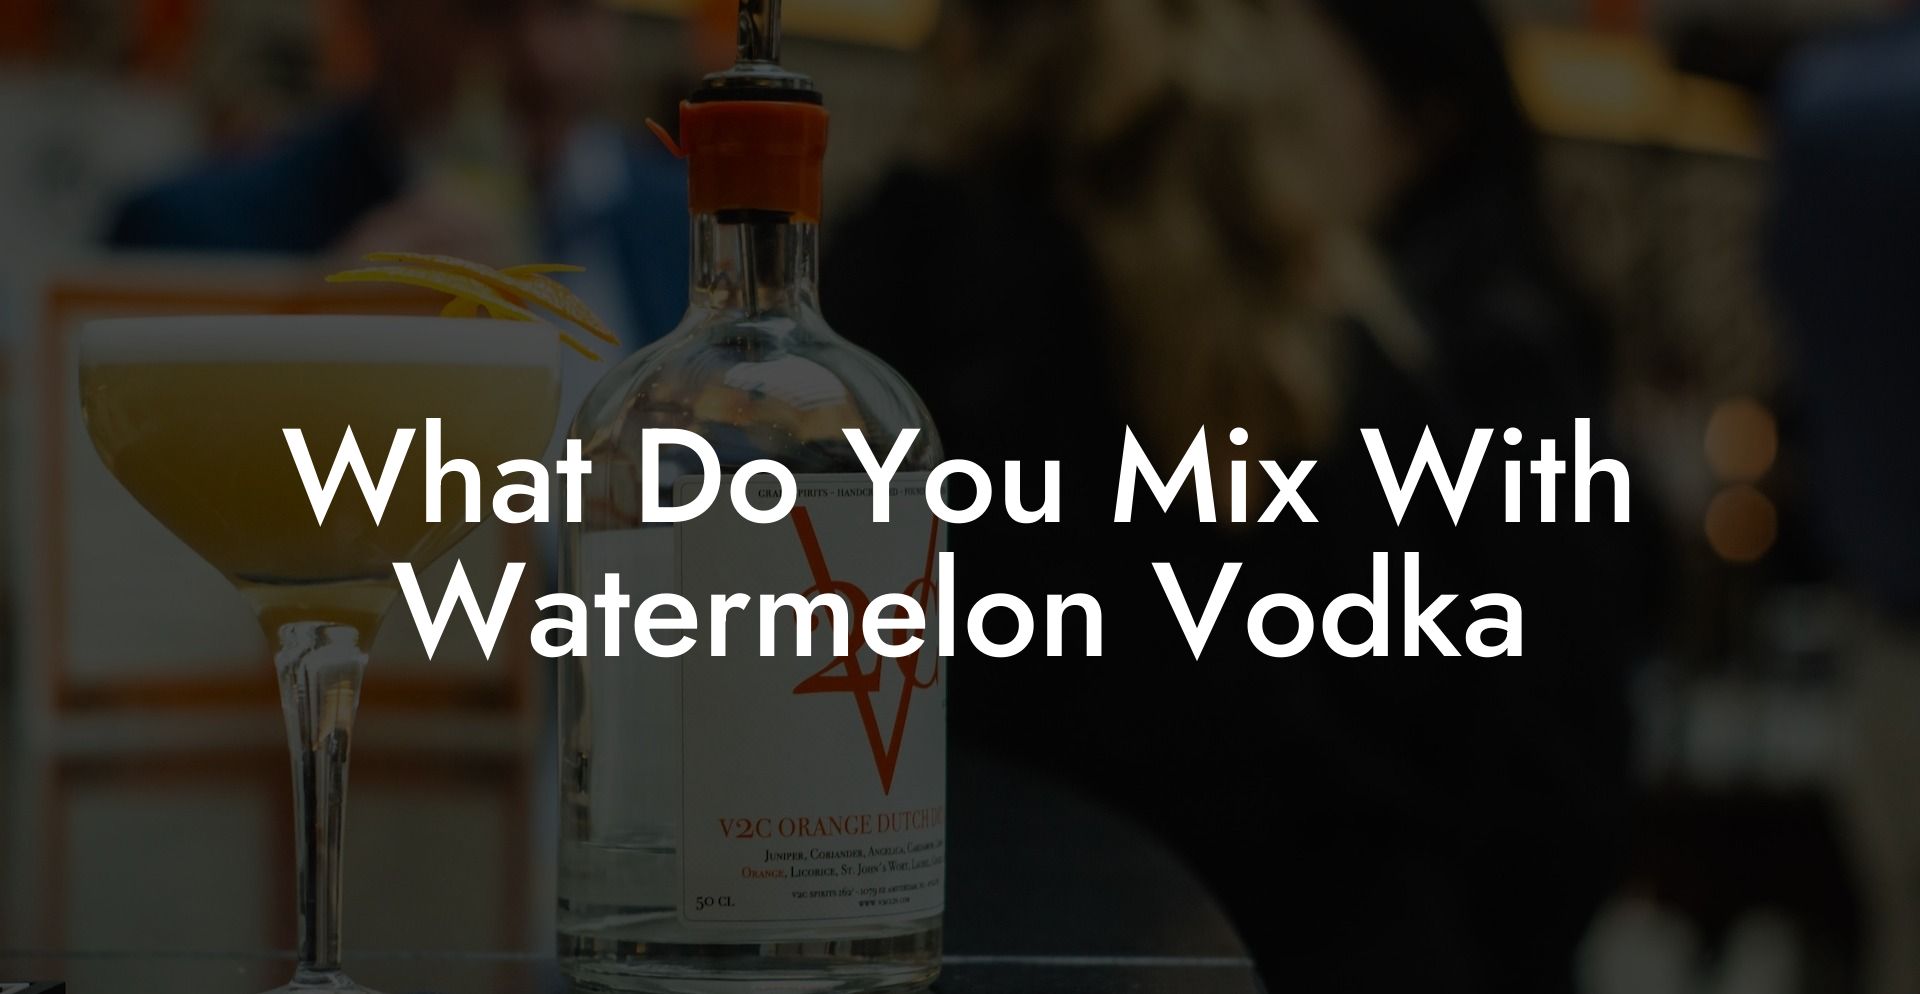 What Do You Mix With Watermelon Vodka